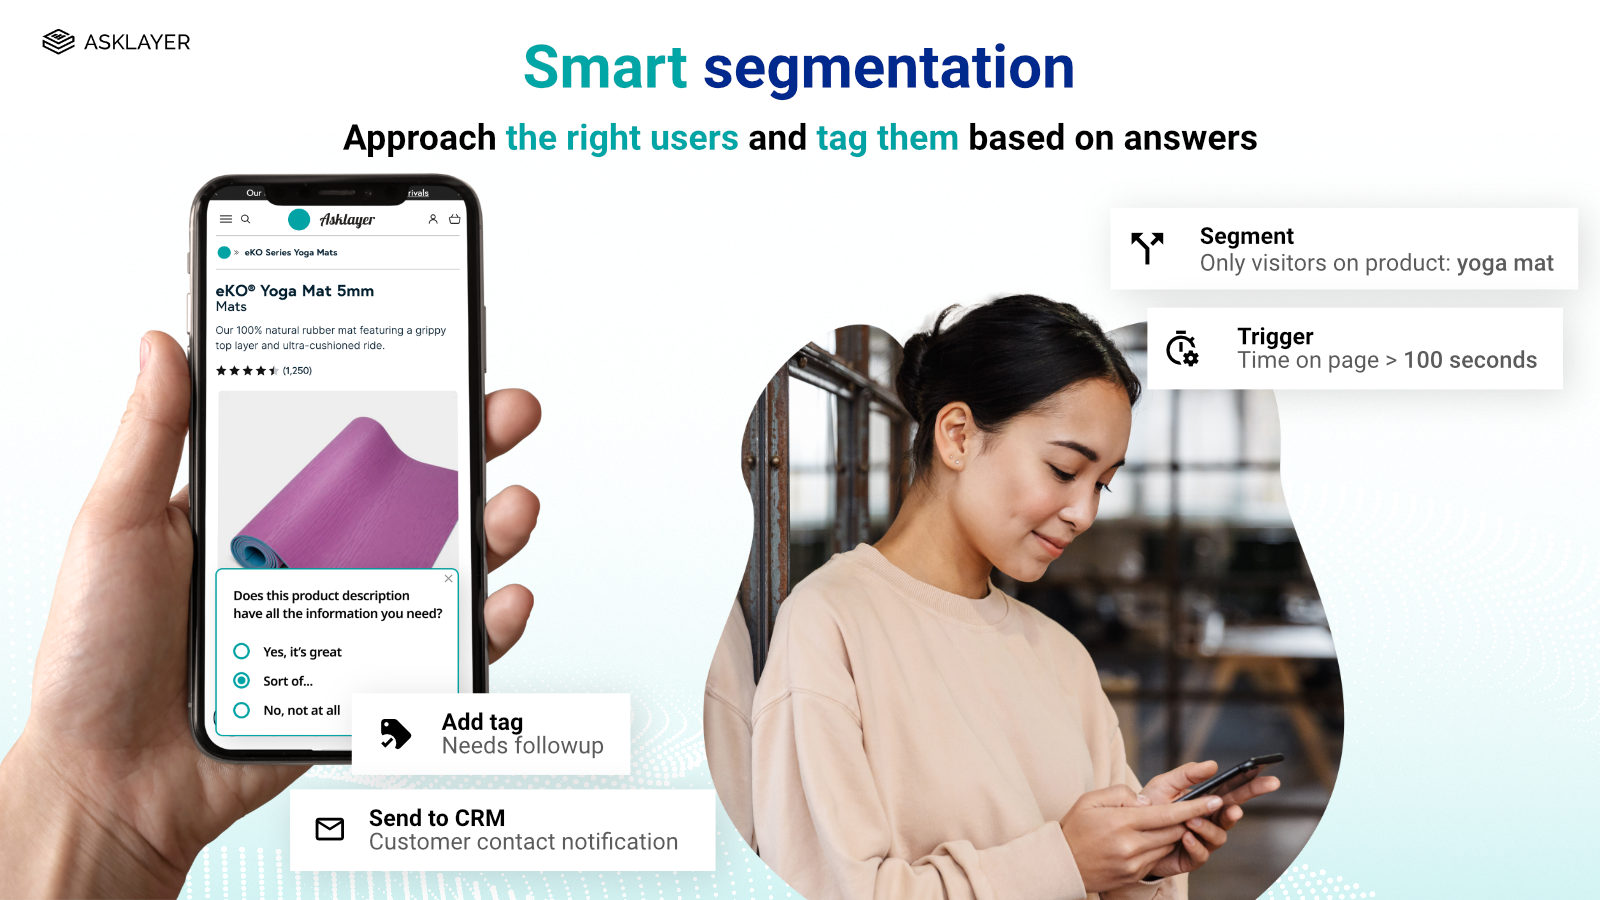 Asklayer Segment users easily based on their answers